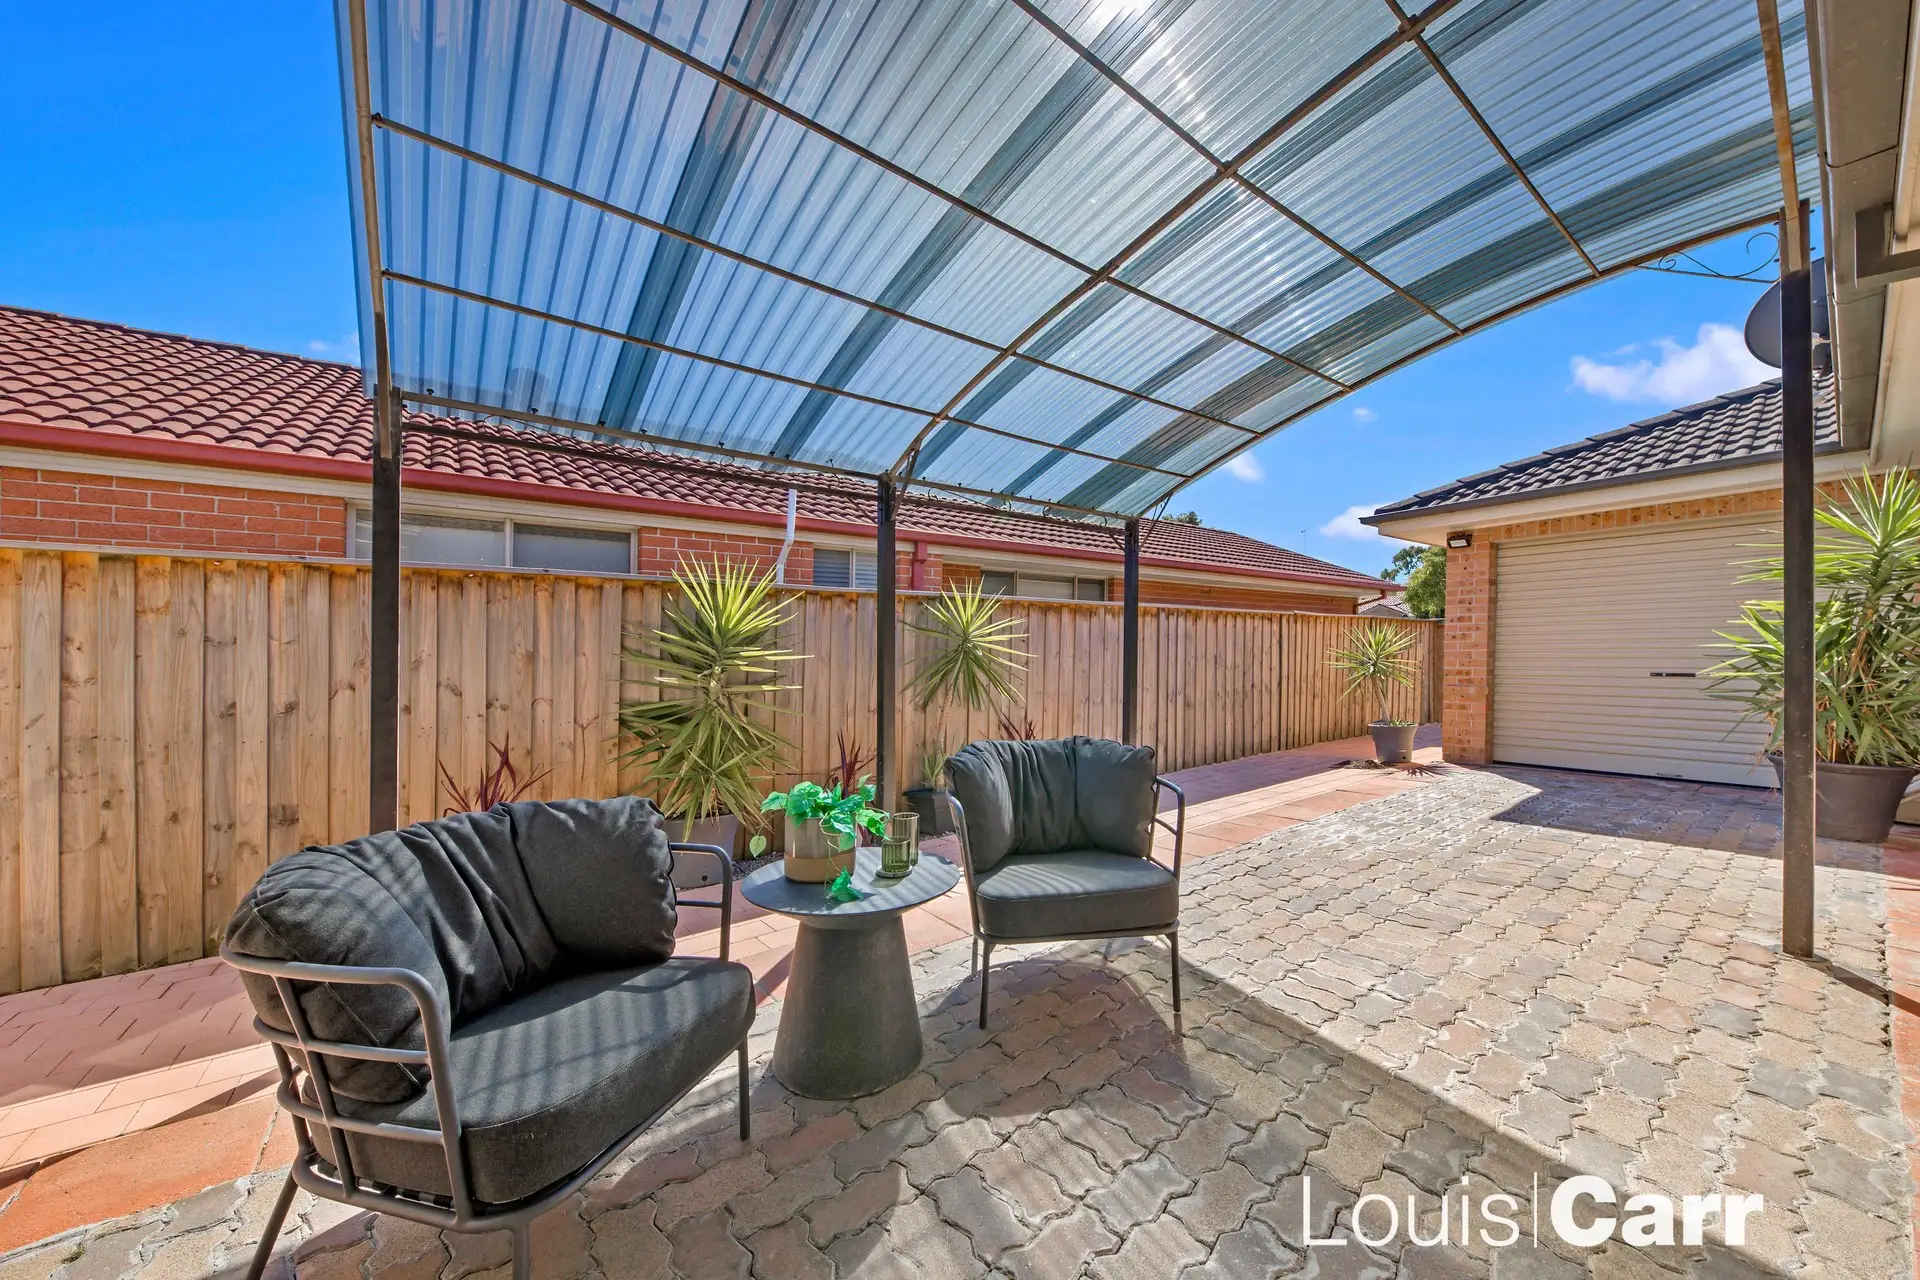 Photo #3: 30 Macquarie Avenue, Kellyville - Sold by Louis Carr Real Estate